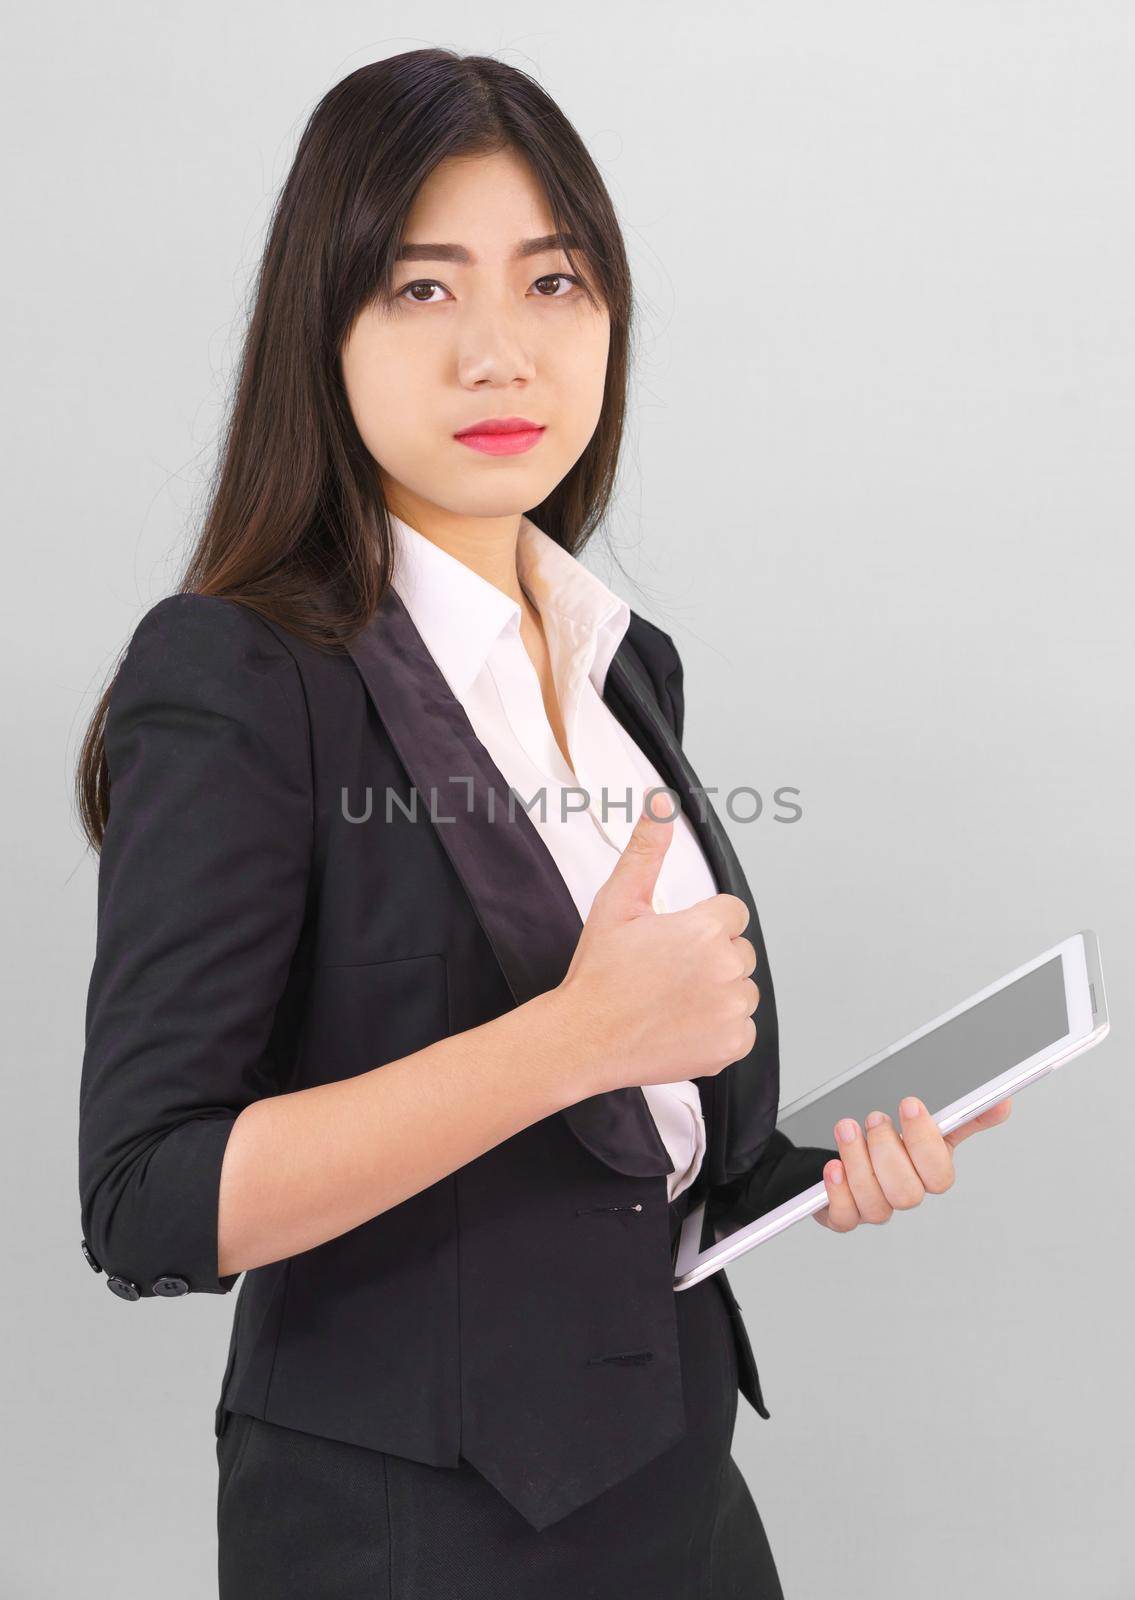 Young women standing in suit holding digital tablet by stoonn